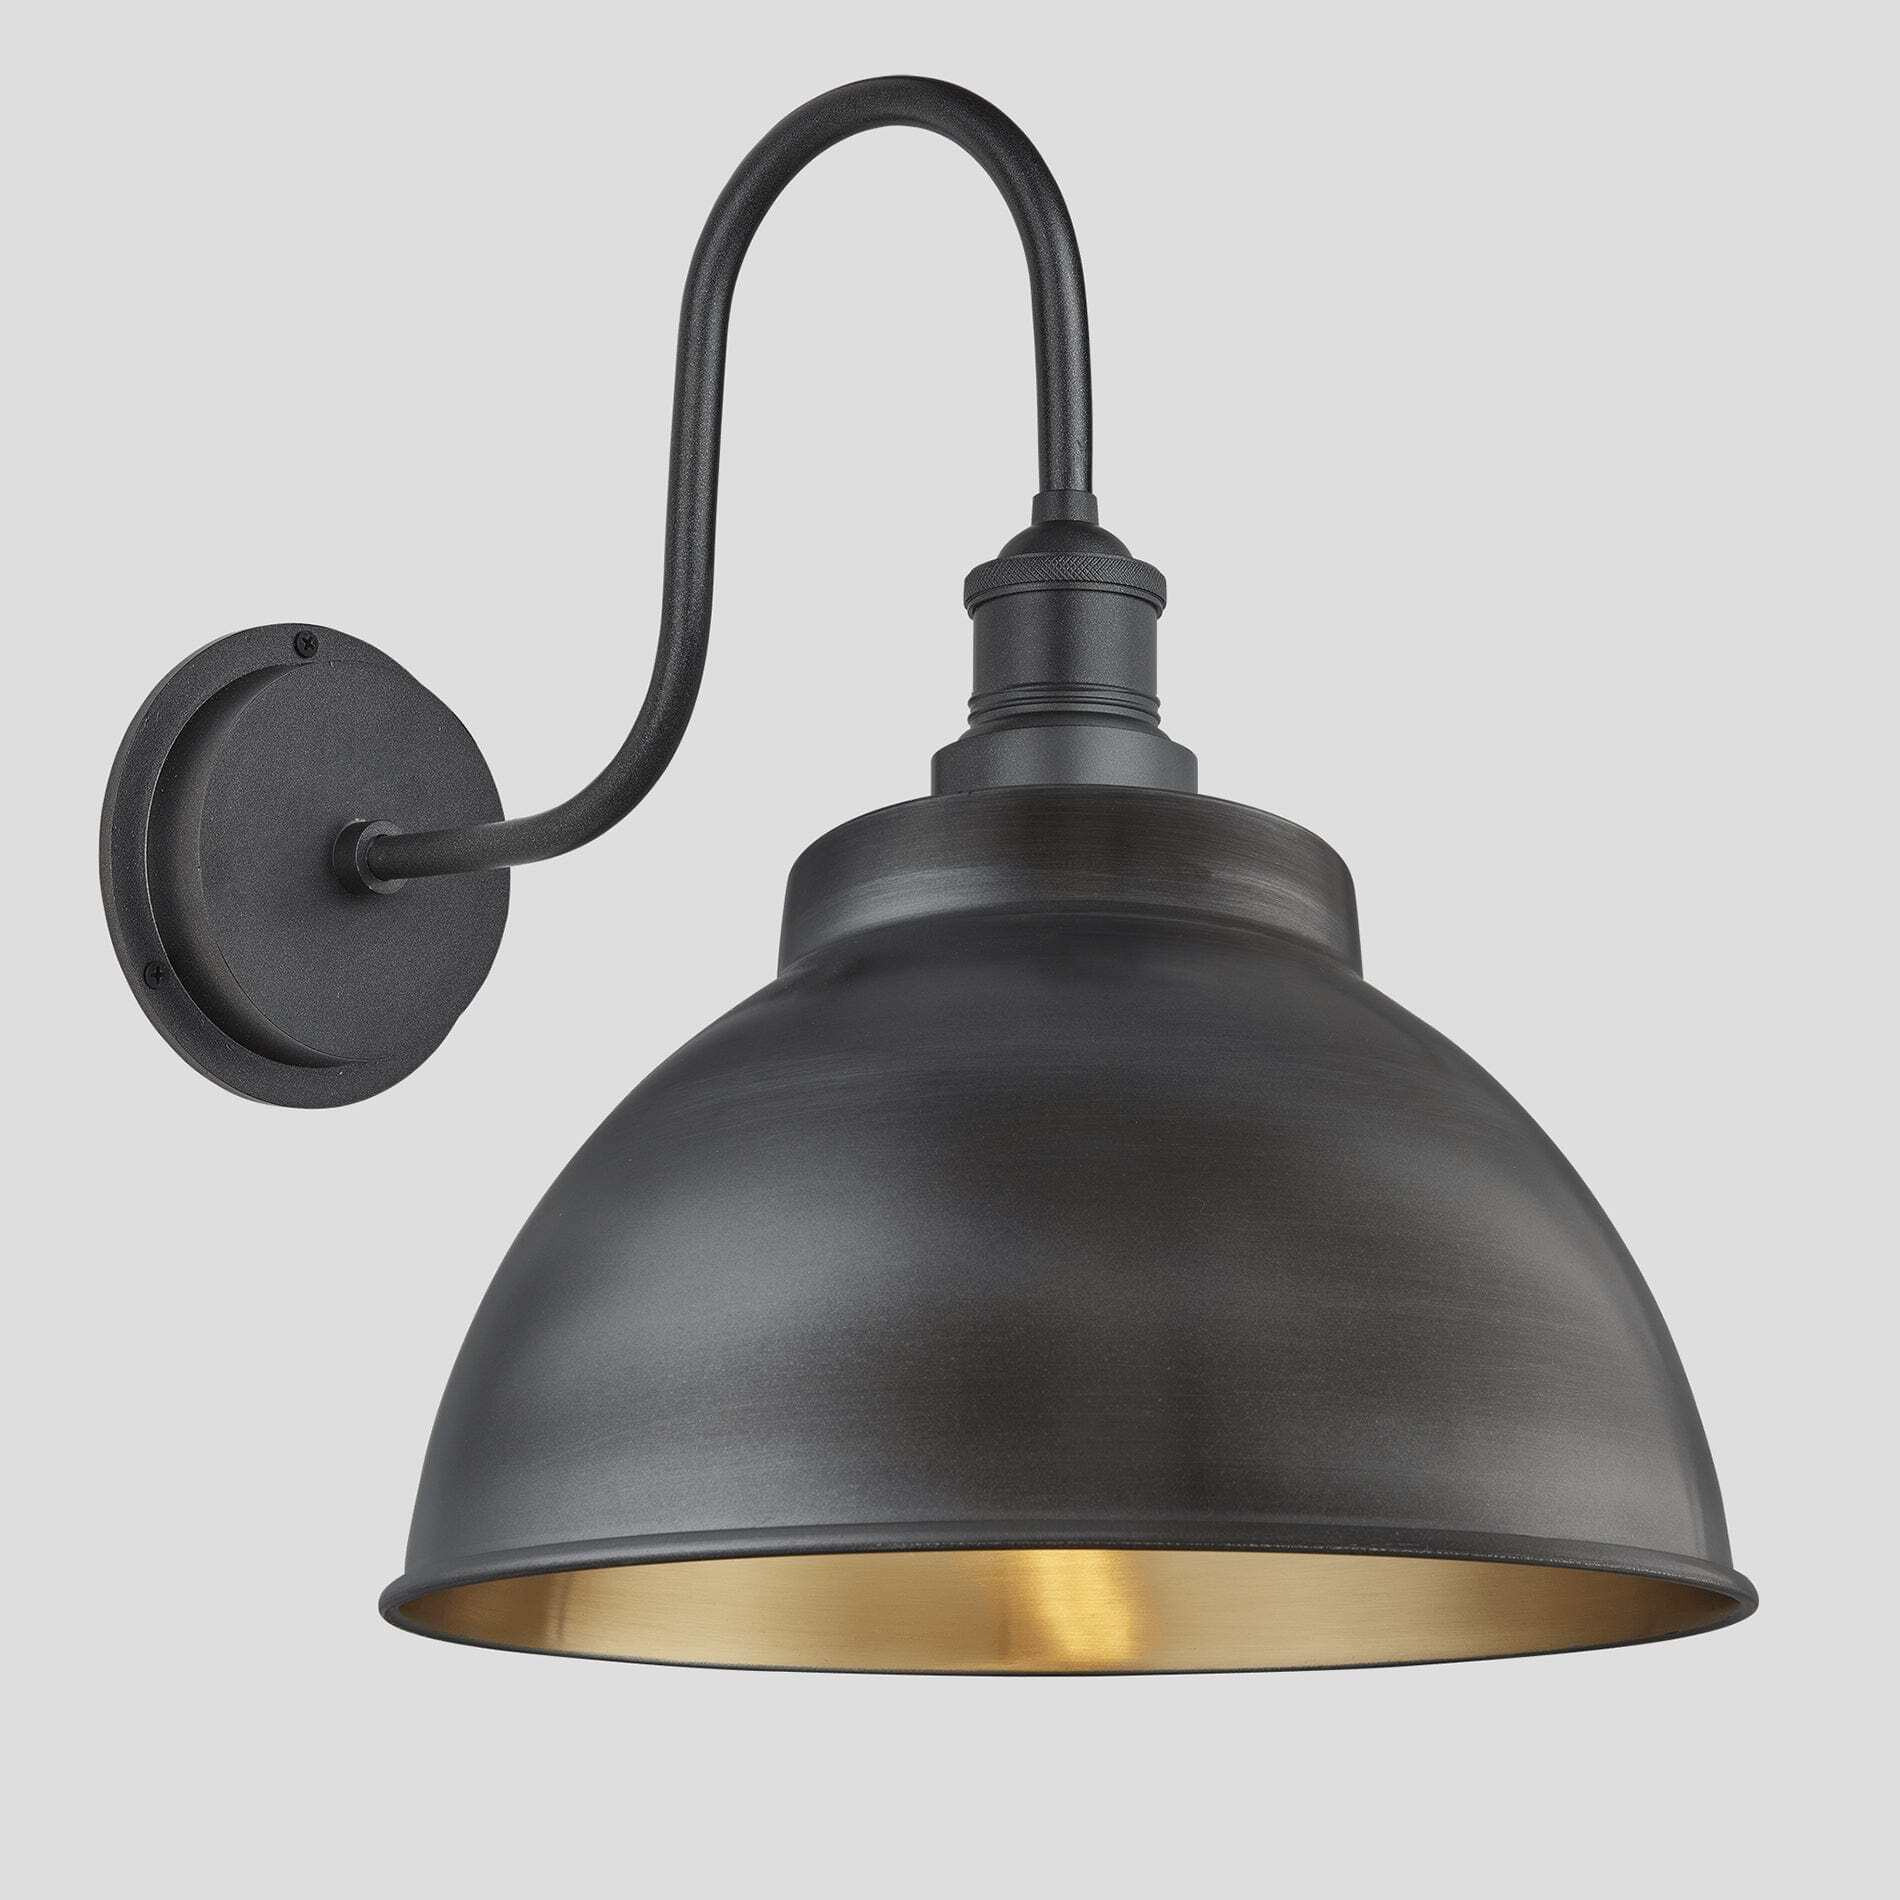 Swan Neck Outdoor & Bathroom Dome Wall Light - 13 Inch - Pewter & Brass - image 1